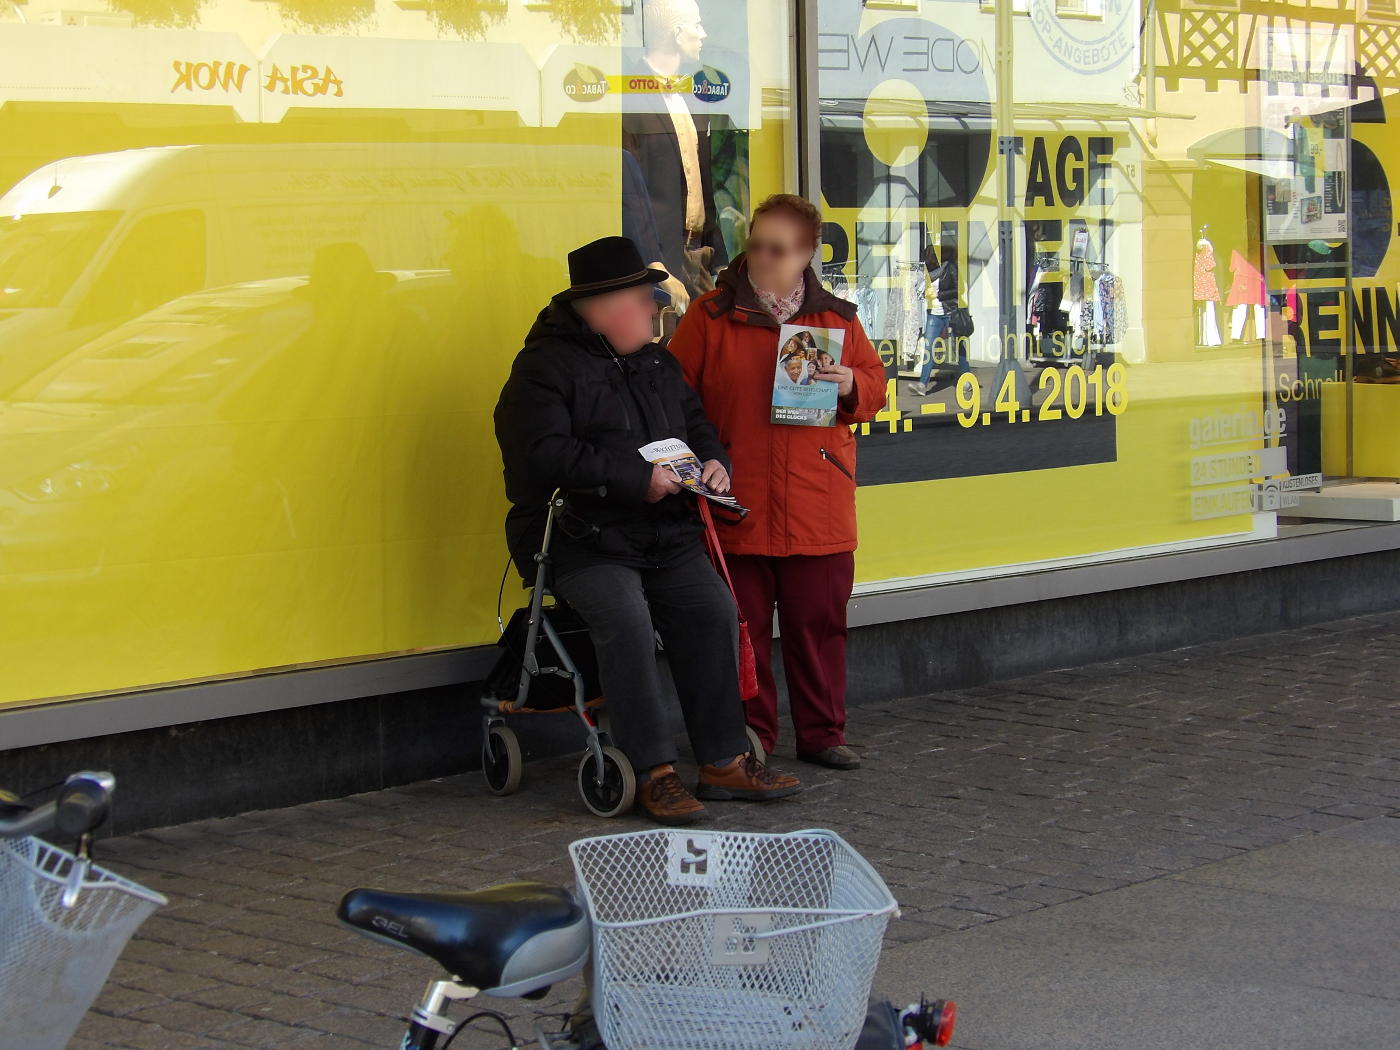 Speyer as good as Jehovah's Witnesses-free and in Wiesloch you can hardly find them any more